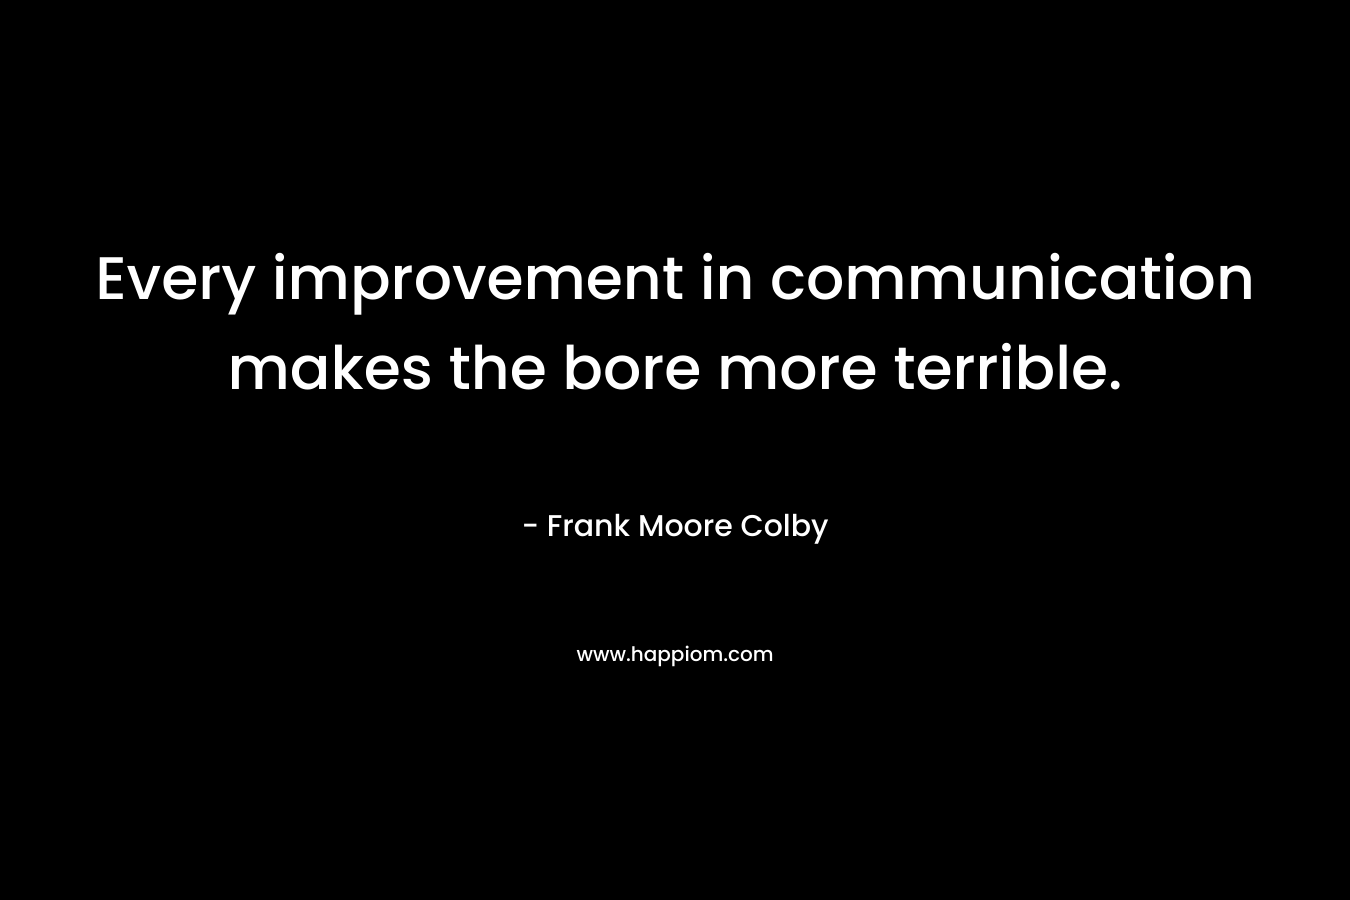 Every improvement in communication makes the bore more terrible. – Frank Moore Colby